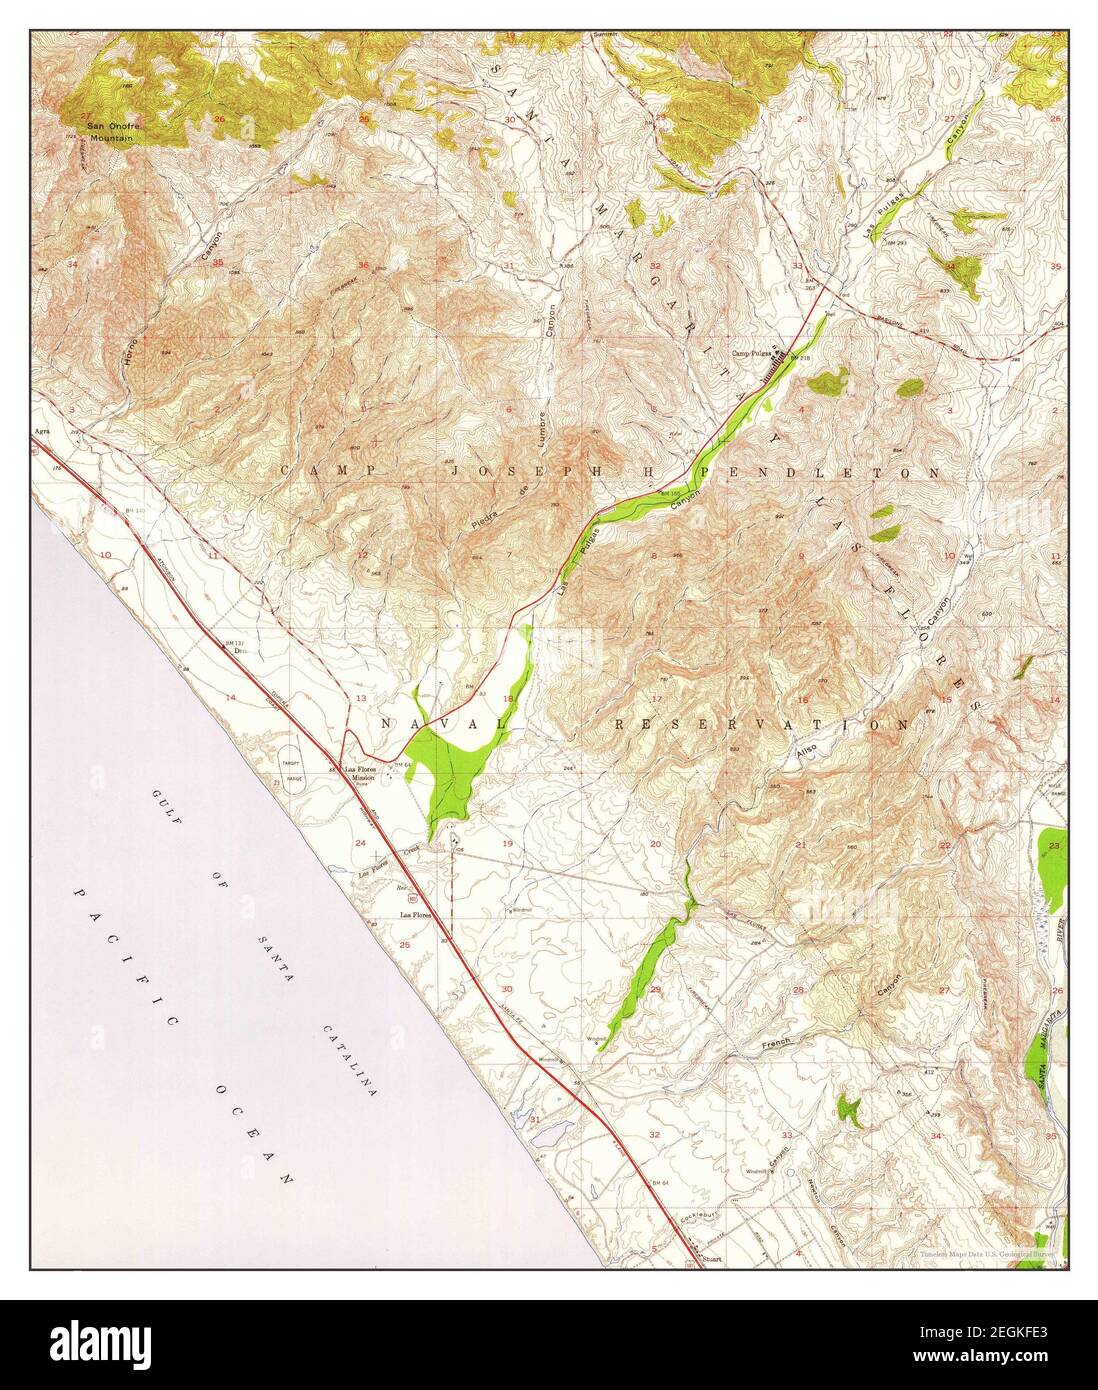 Las Pulgas Canyon, California, map 1948, 1:24000, United States of America by Timeless Maps, data U.S. Geological Survey Stock Photo